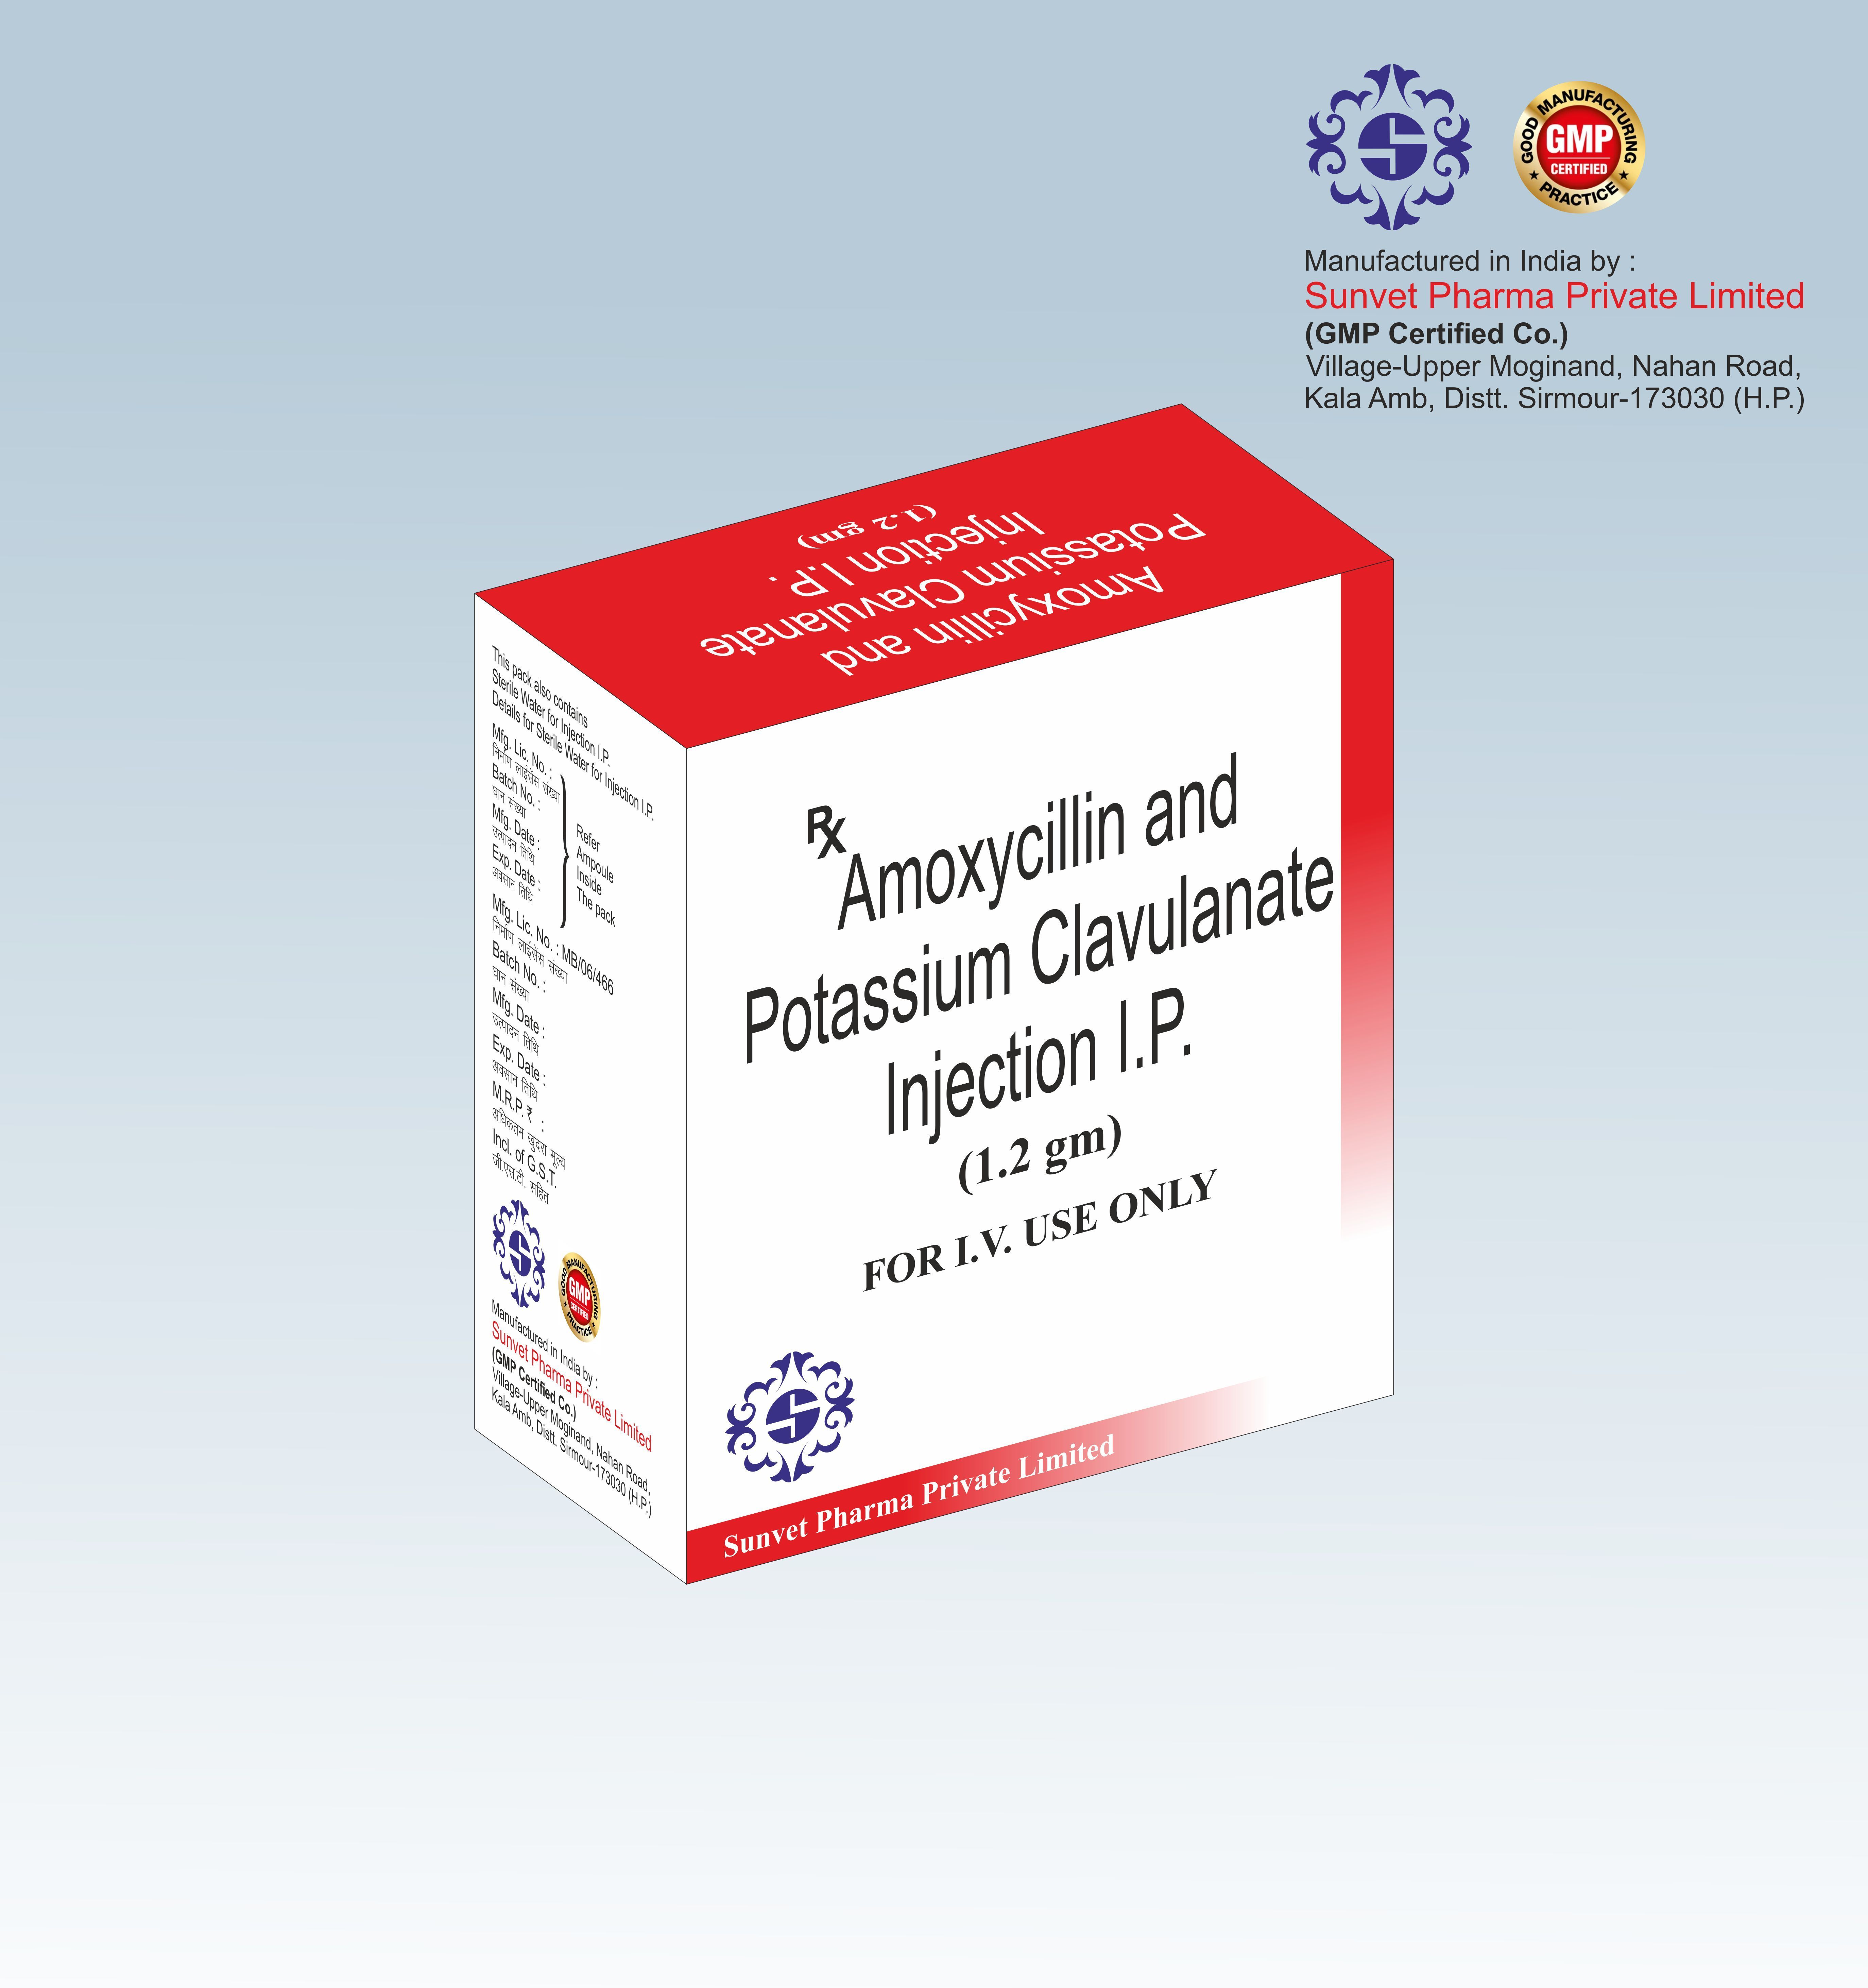 Ceftriaxone Sulbactam 4500 mg veterinary injection